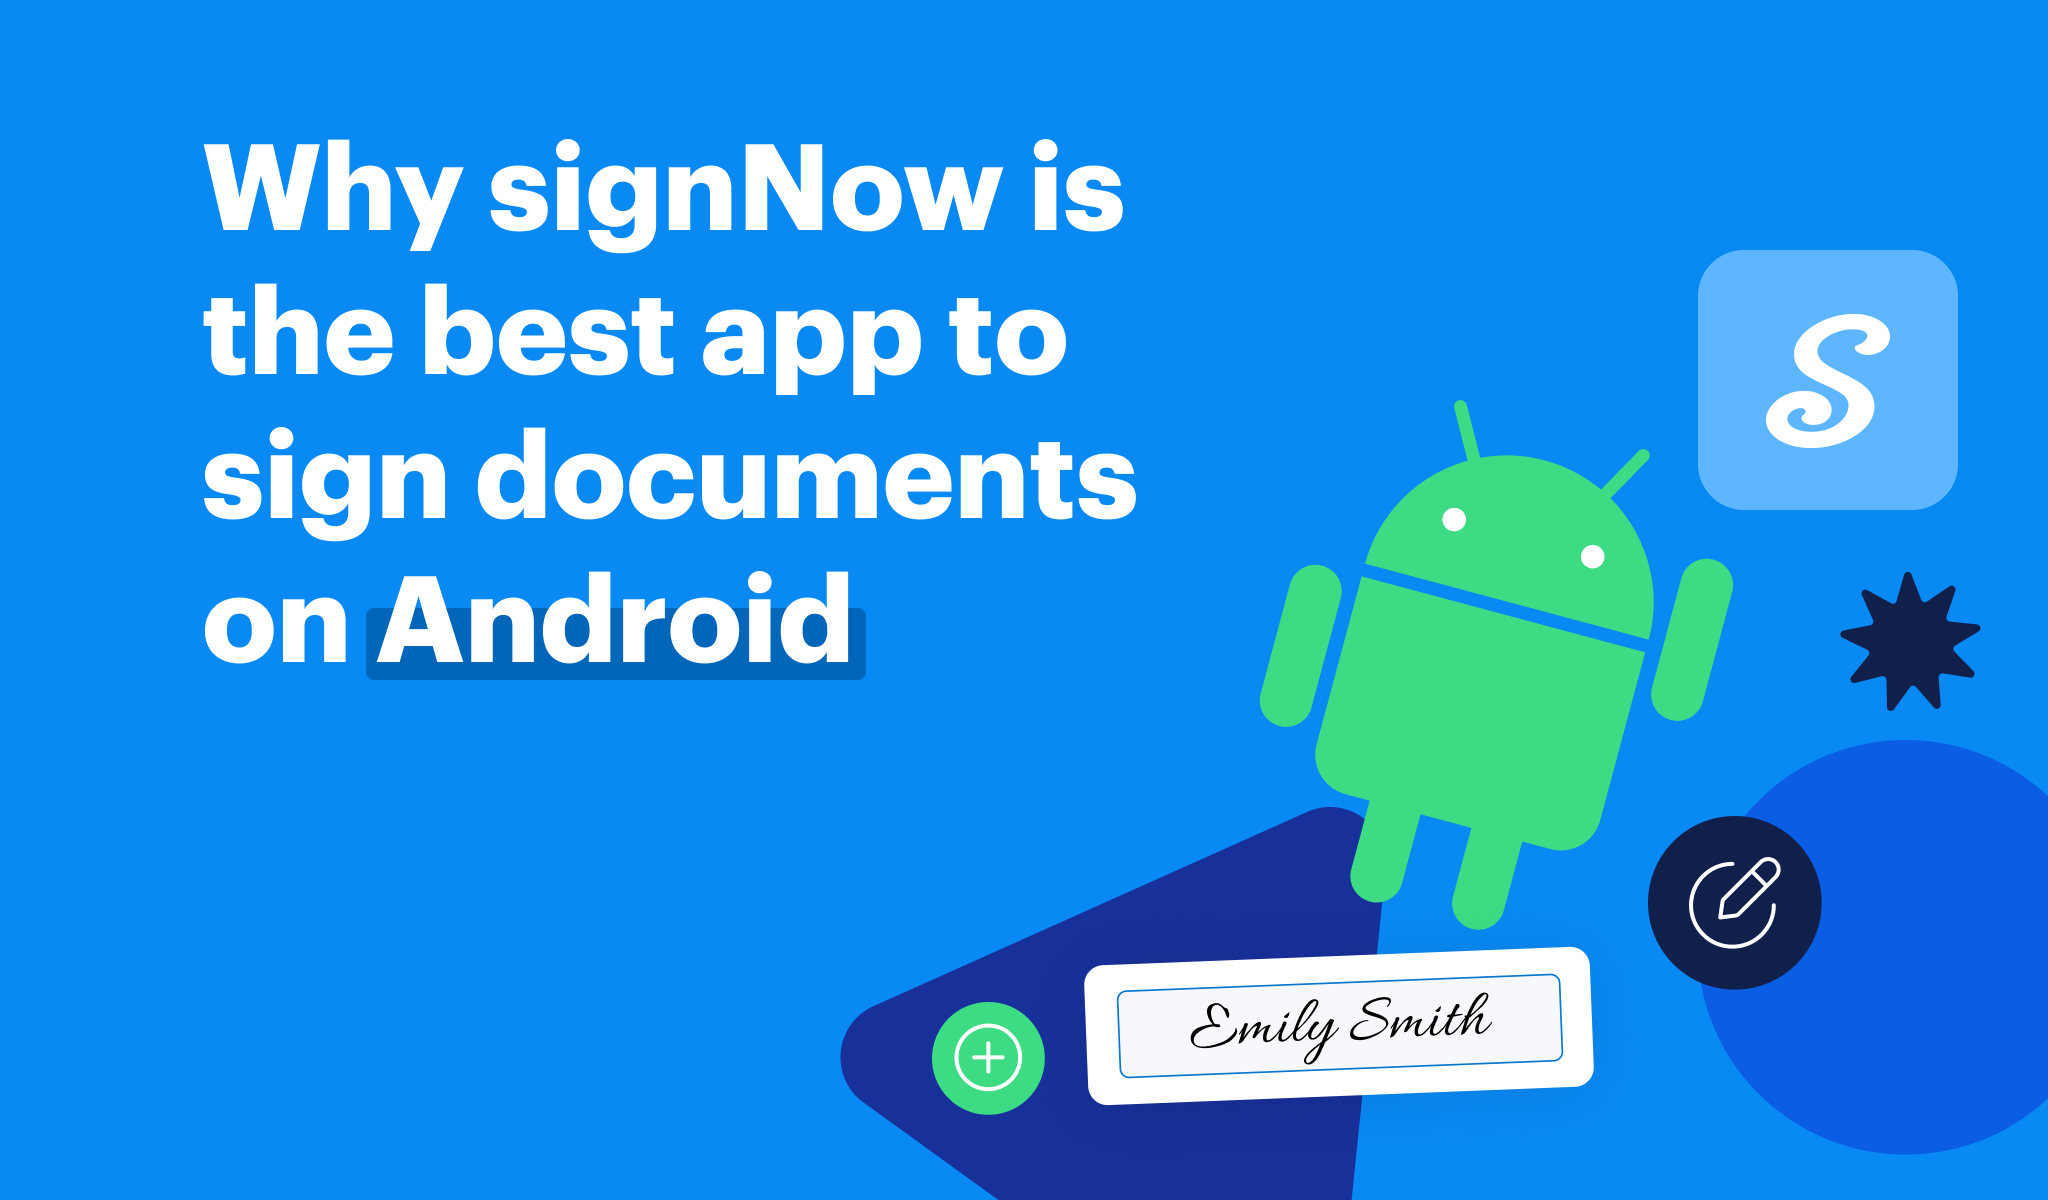 Why signNow is the best app to sign documents on Android